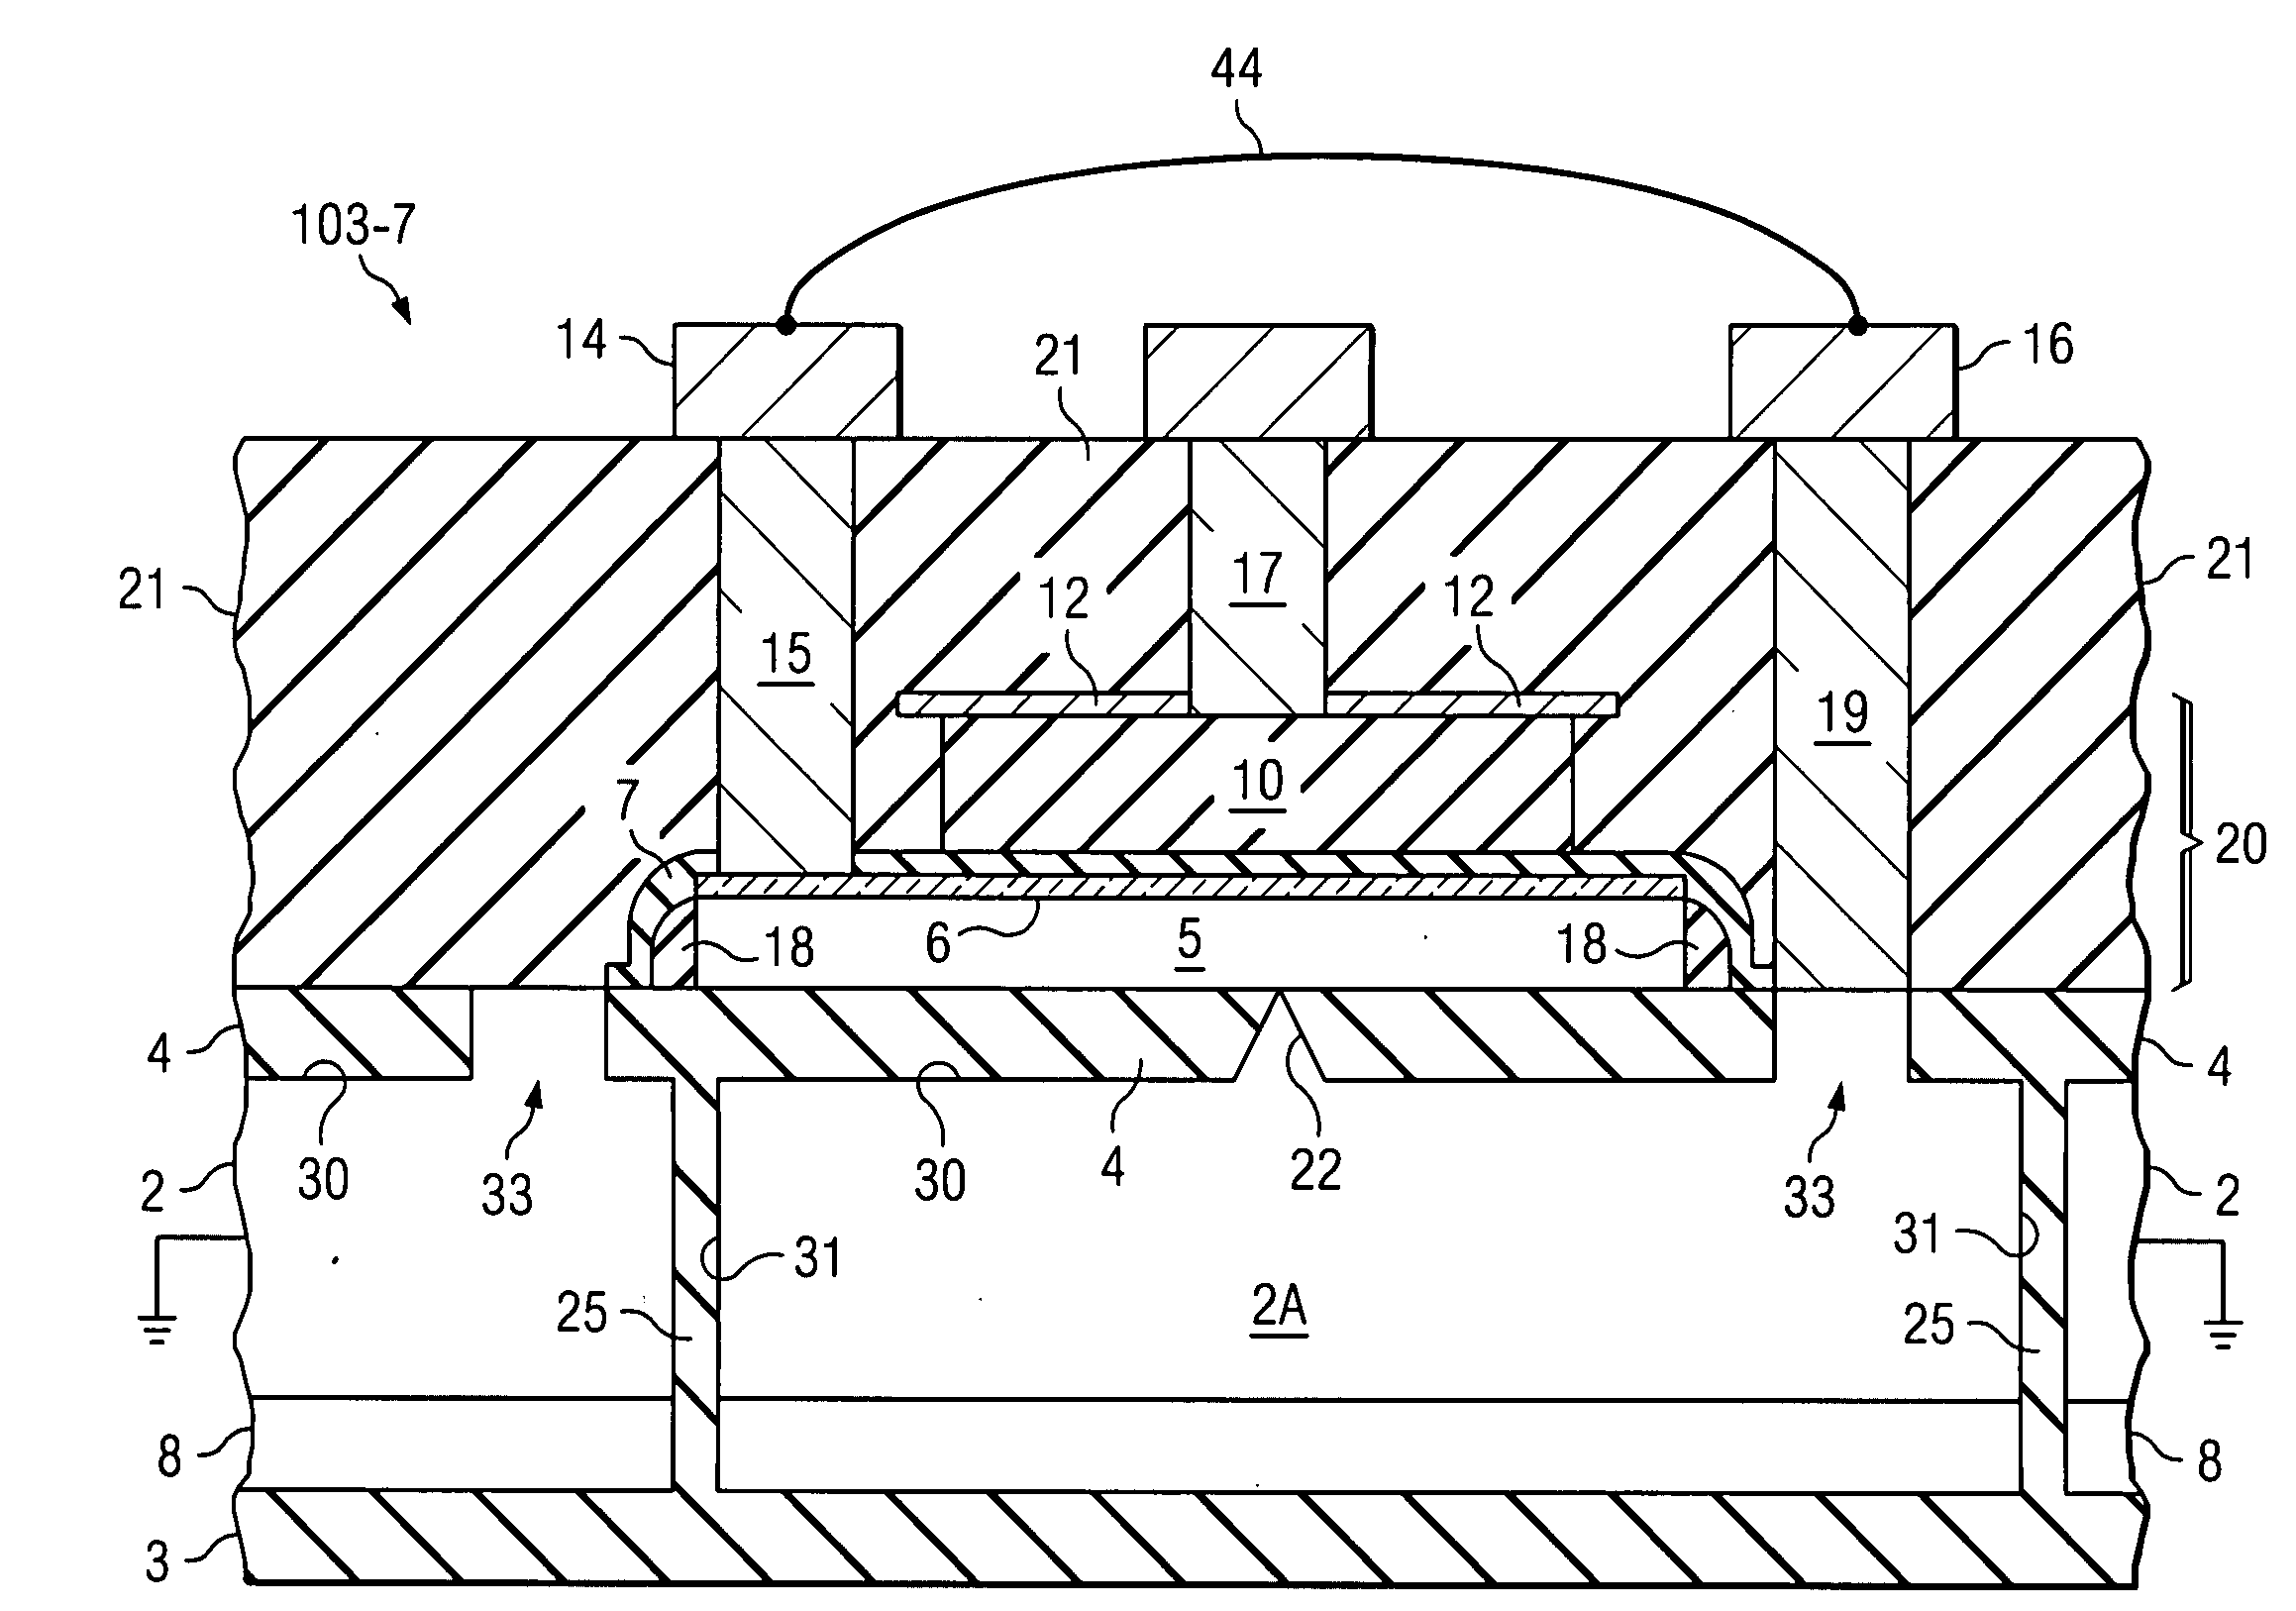 Structure and method for elimination of process-related defects in poly/metal plate capacitors